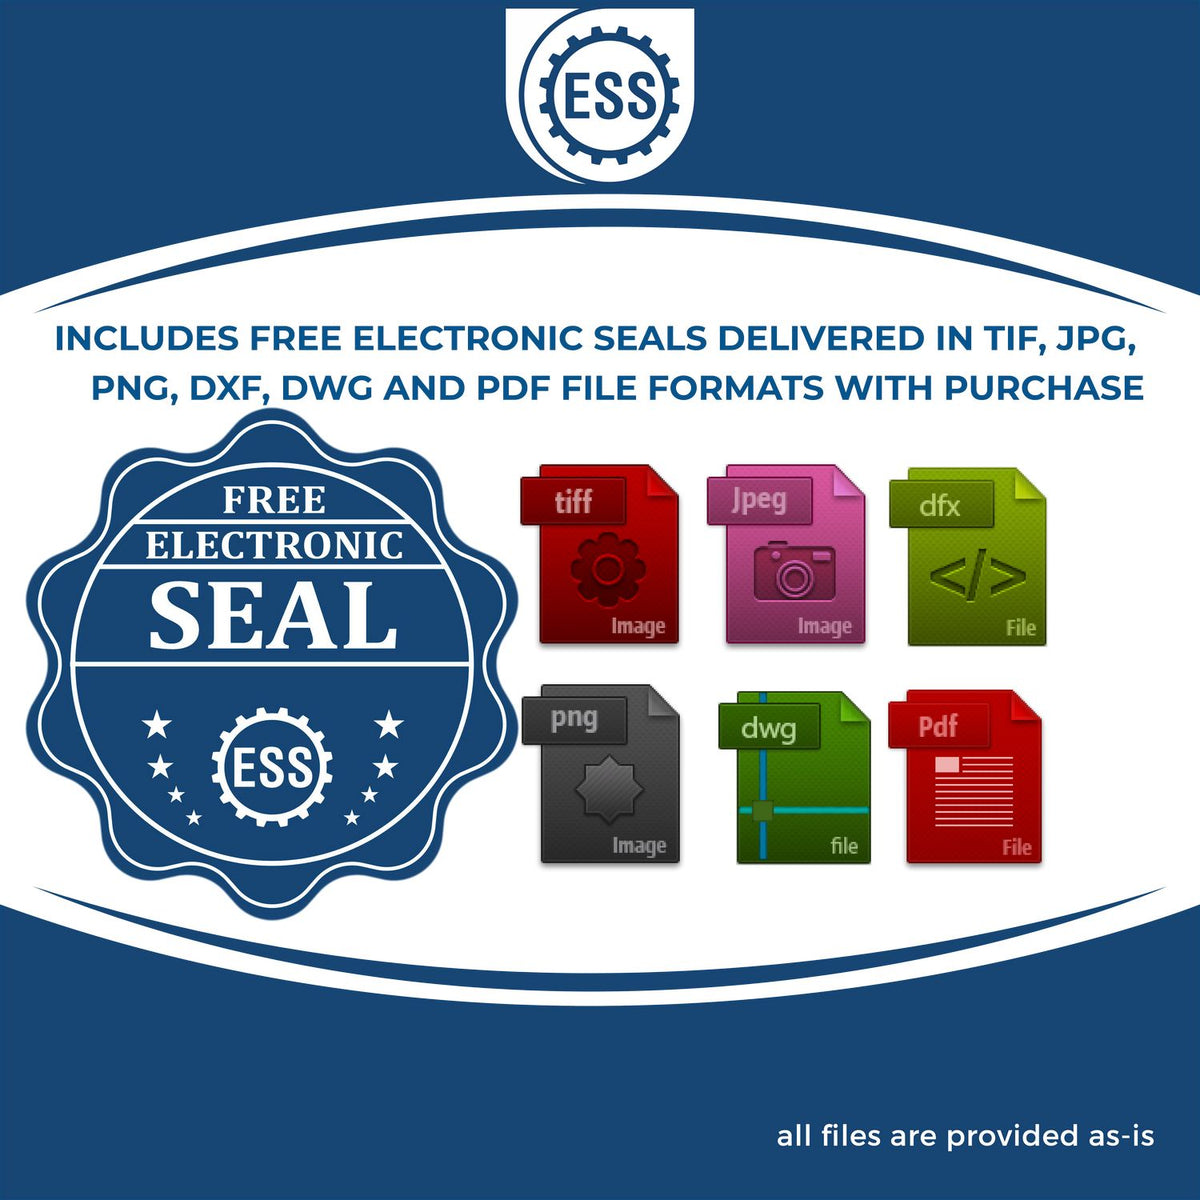 An infographic for the free electronic seal for the Montana Professional Geologist Seal Stamp illustrating the different file type icons such as DXF, DWG, TIF, JPG and PNG.